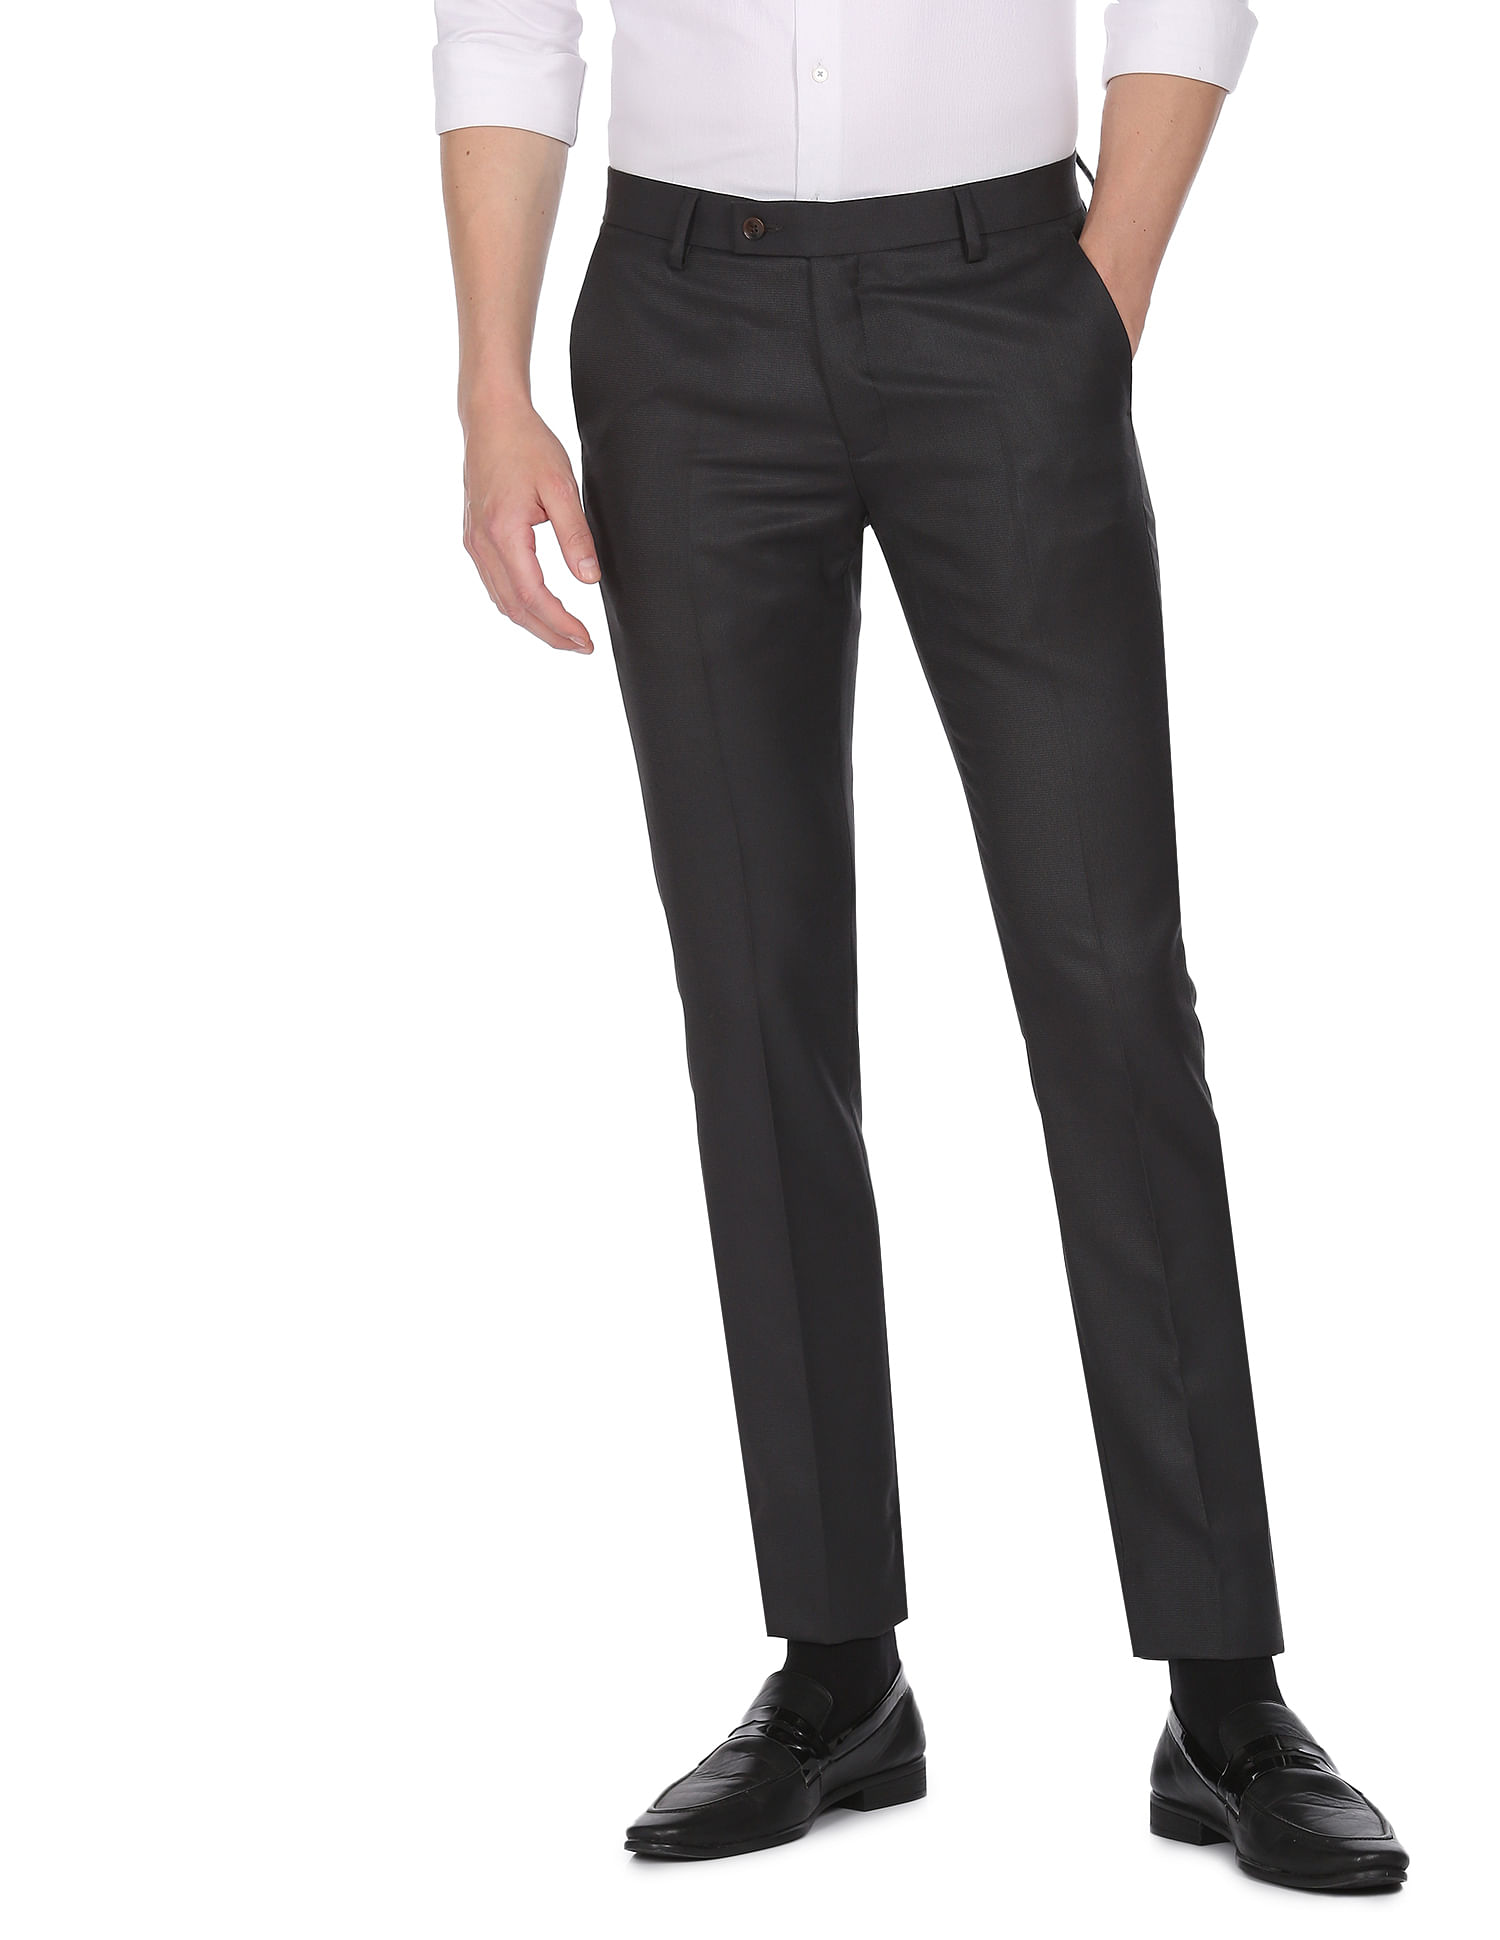 Buy LH Urban Black Solid Formal Trousers Online  488371  The Collective